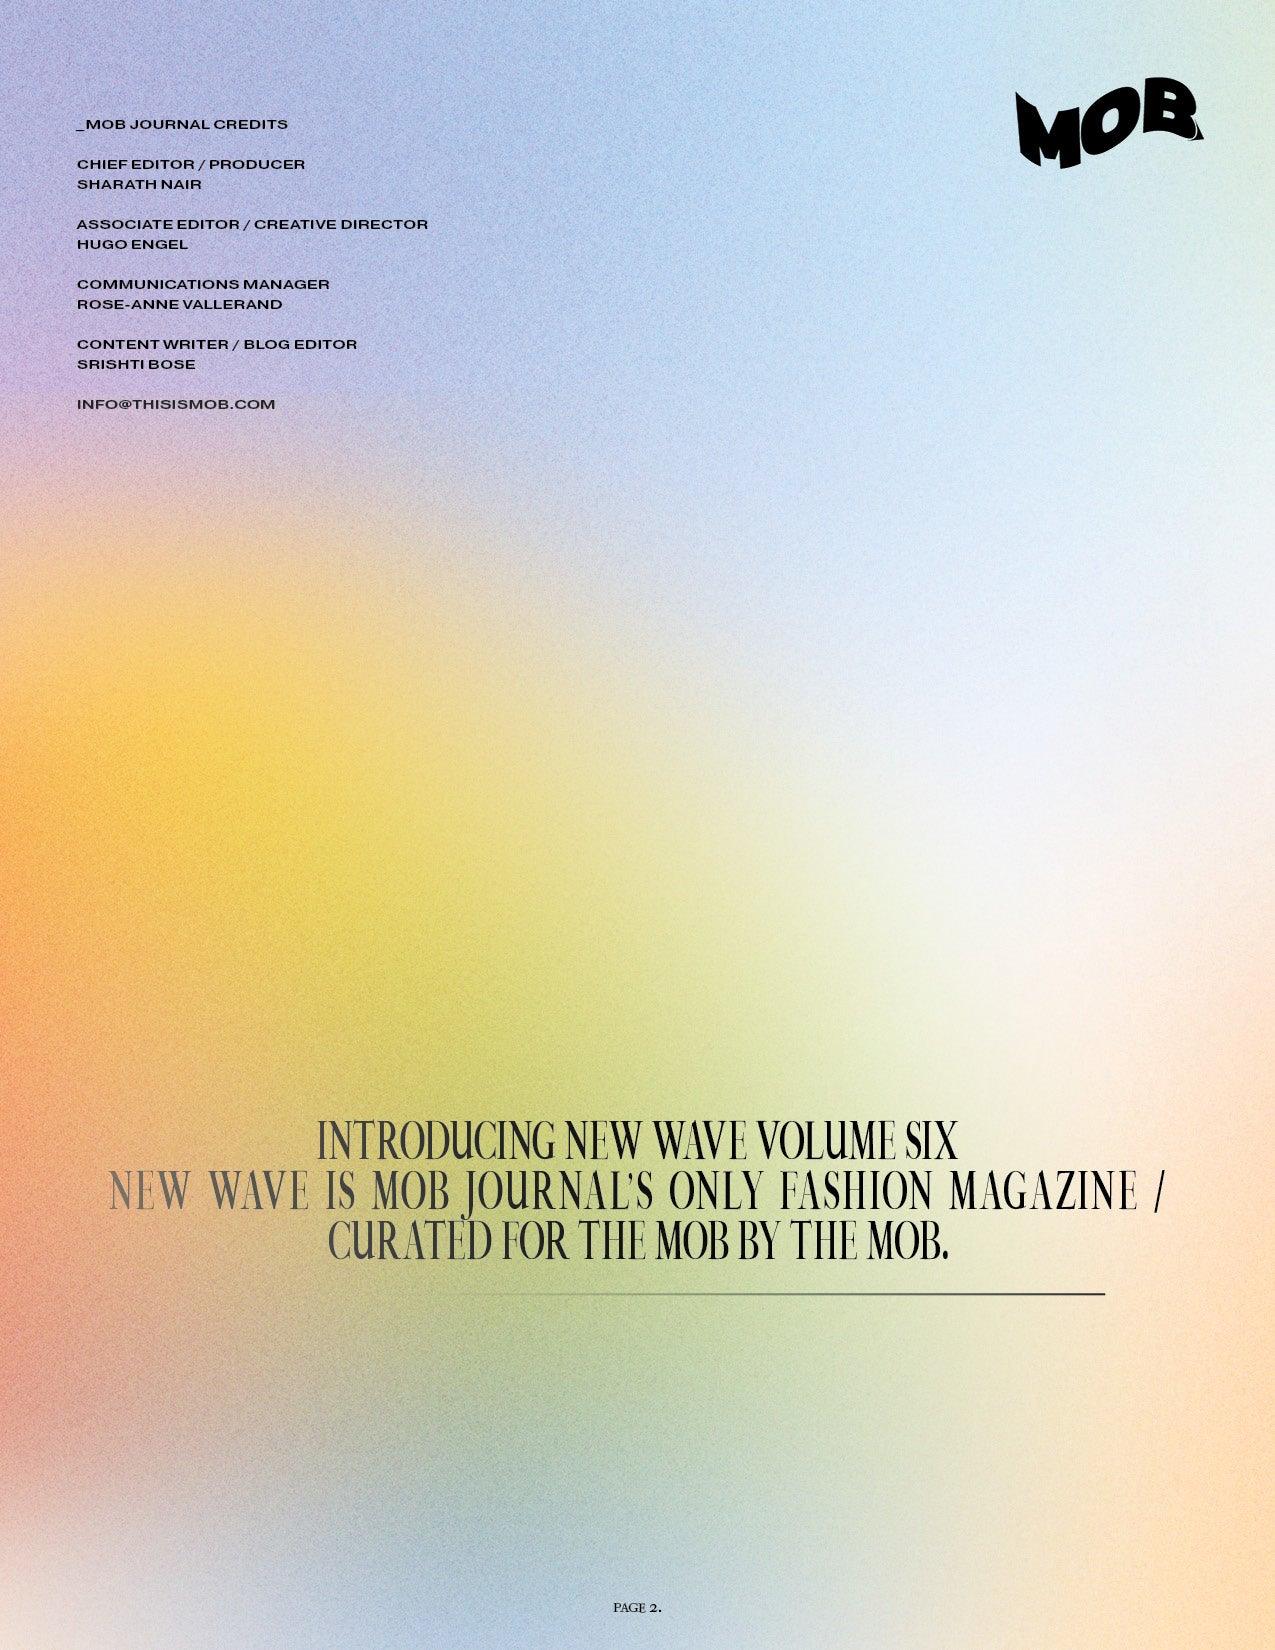 NEW WAVE | VOLUME SIX | ISSUE #14 - Mob Journal